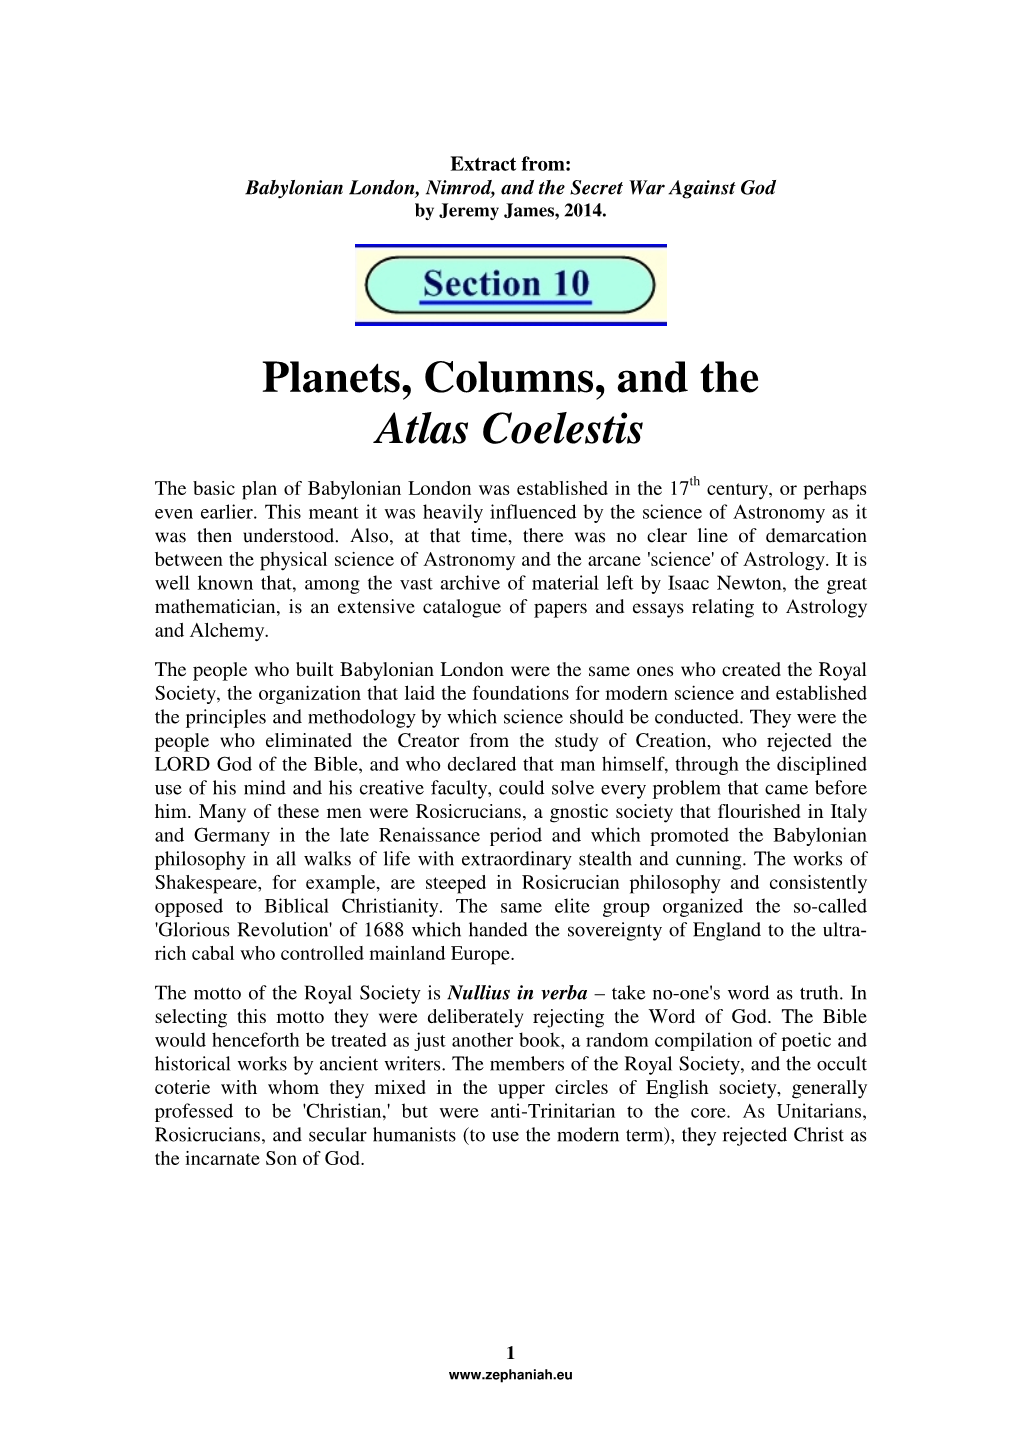 Planets, Columns, and the Atlas Coelestis